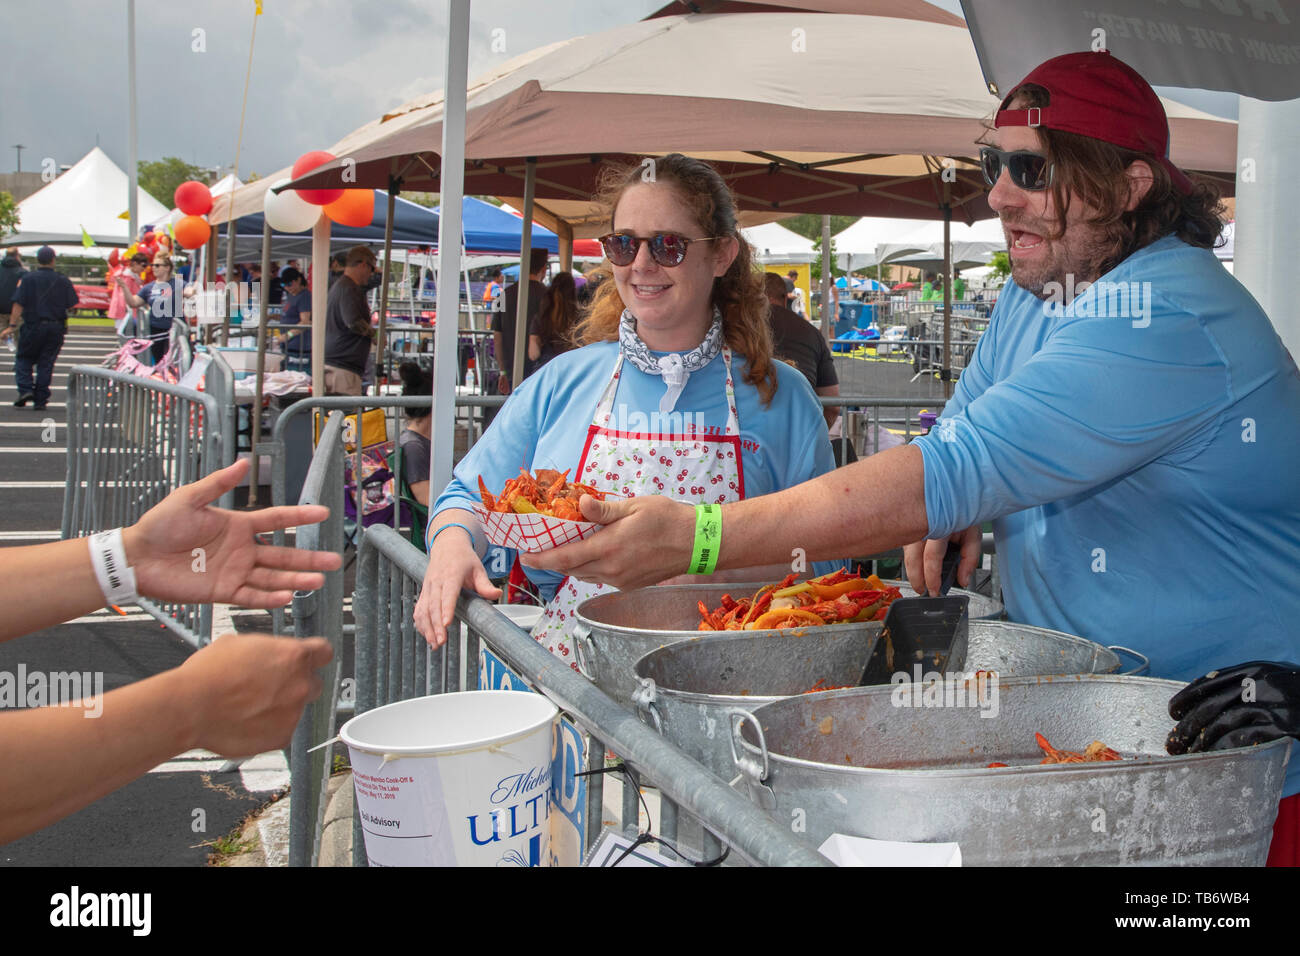 New Orleans, Louisiana - The Crawfish Mambo, an annual crawfish cook-off. Dozens of teams boil and serve crawfish, competing for prize money and bragg Stock Photo